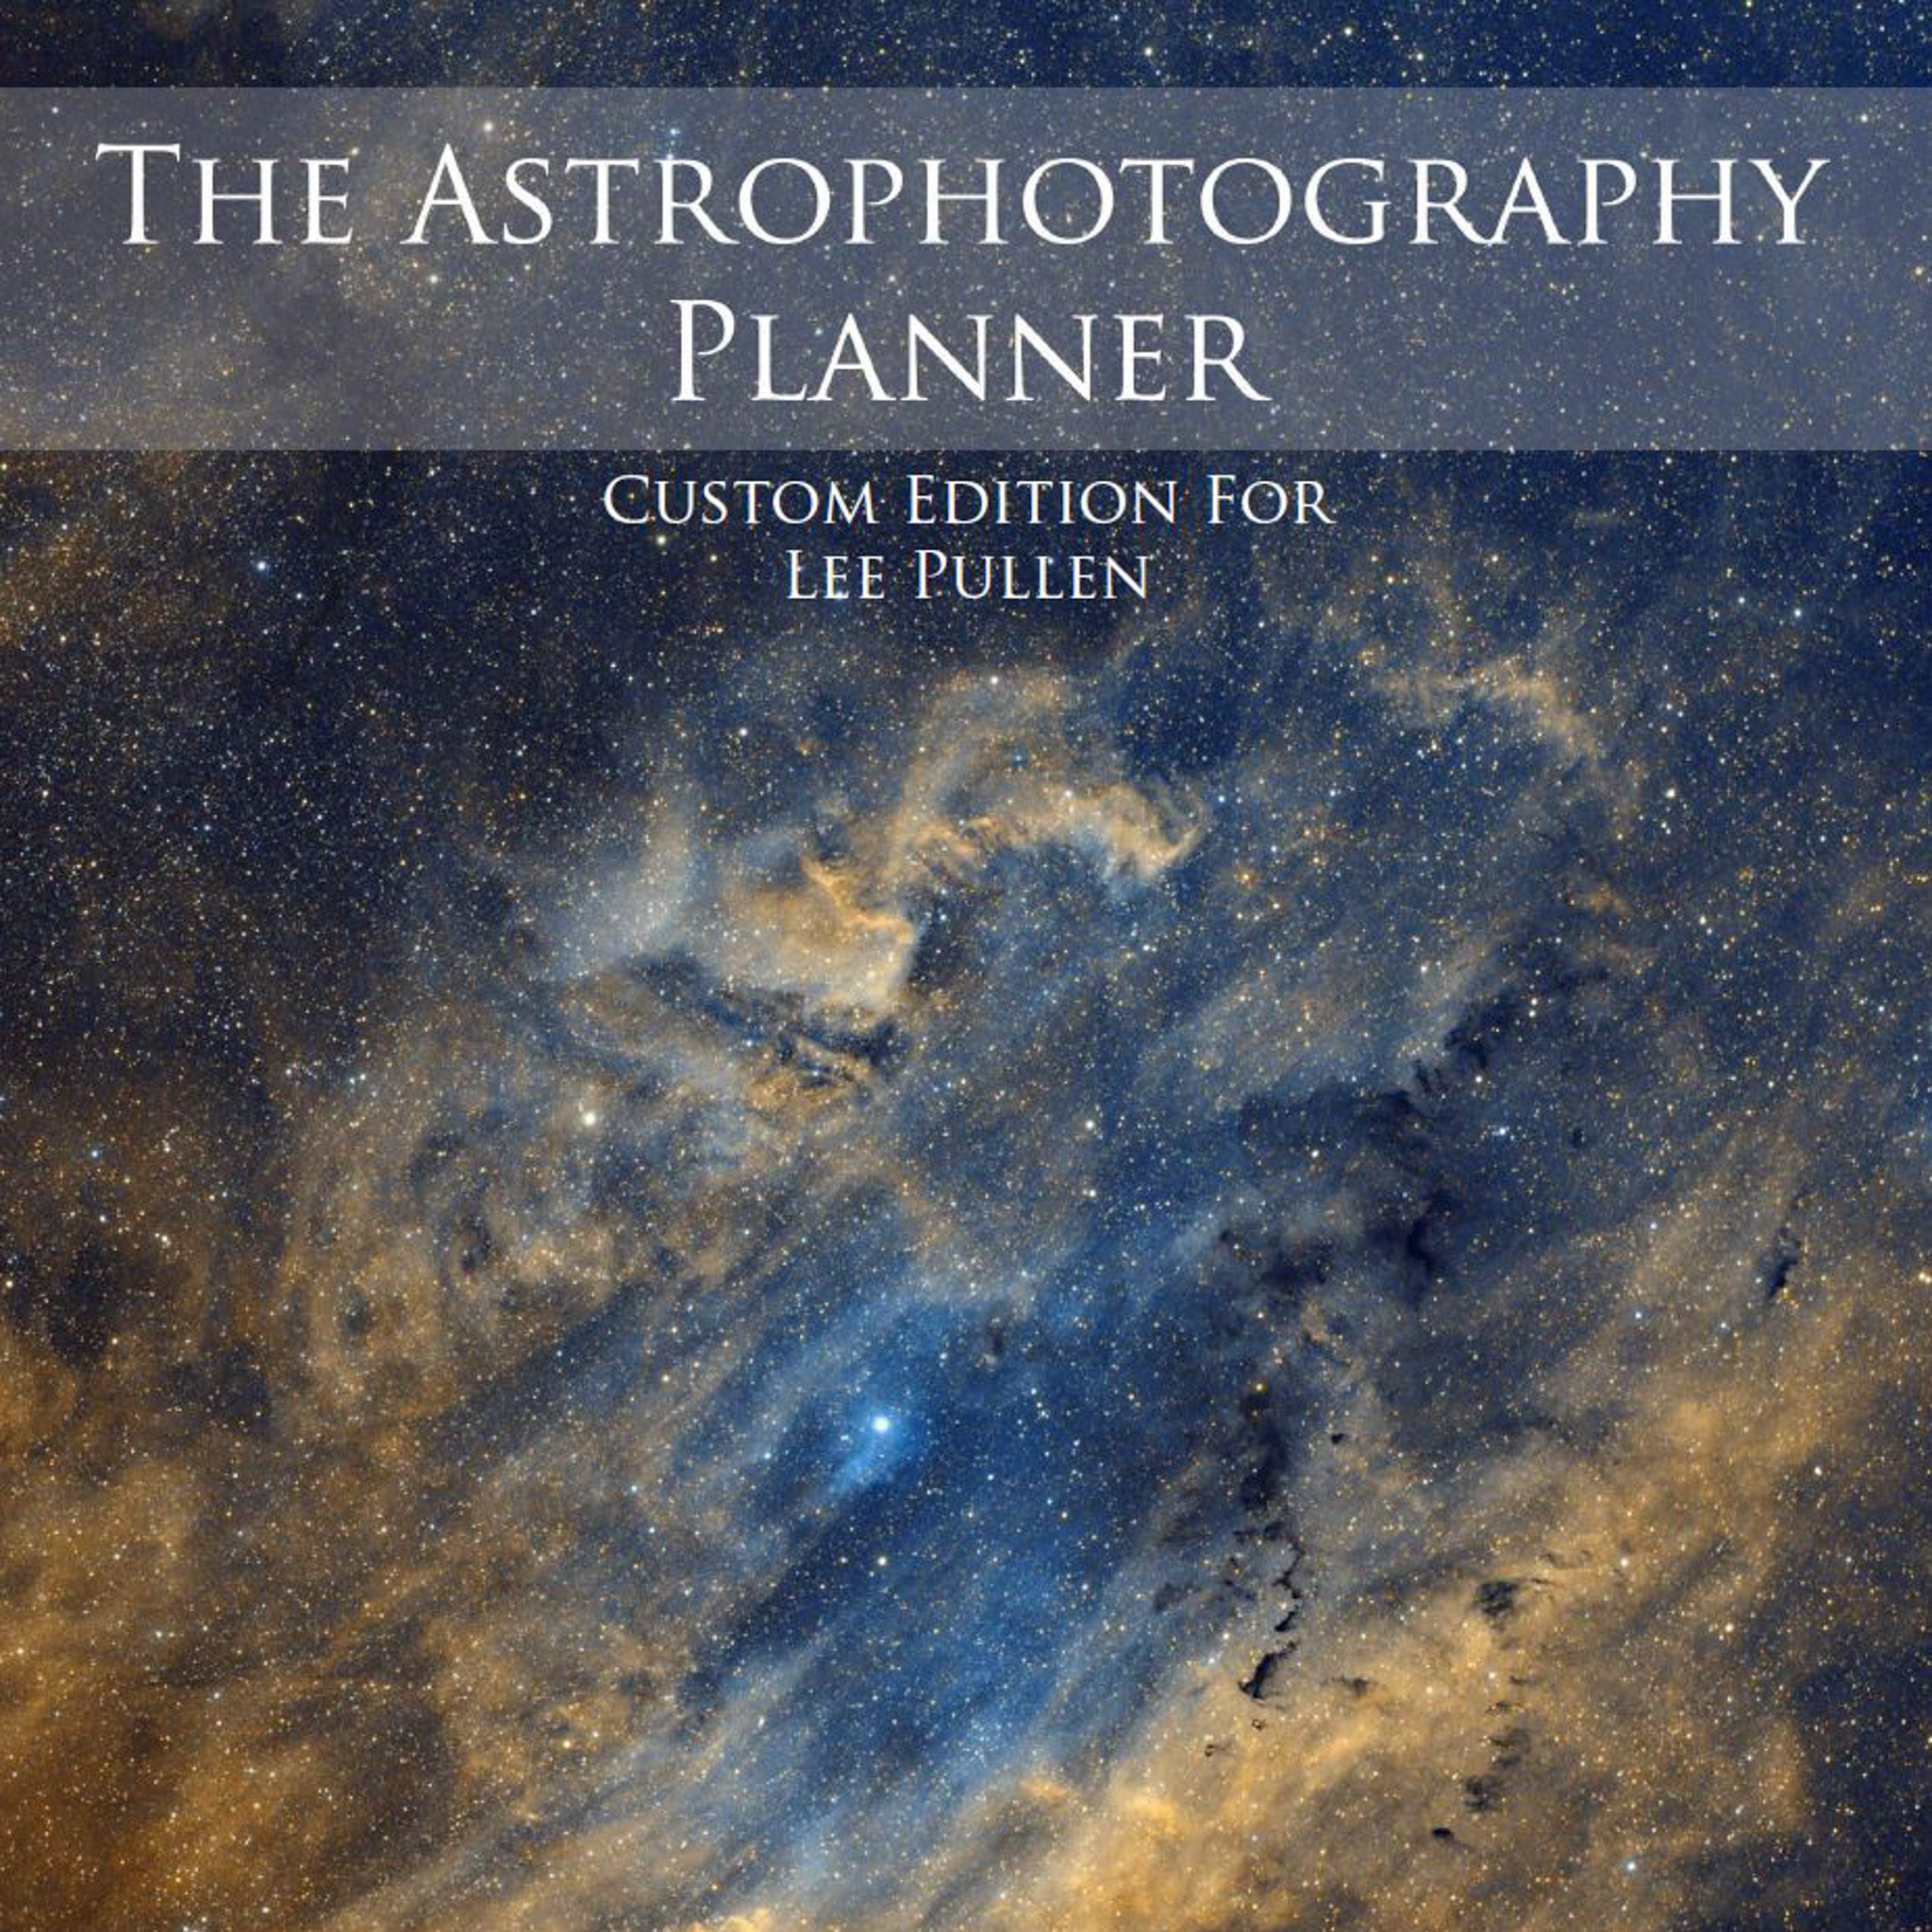 Review The Astrophotography Planner Custom Digital Edition pic